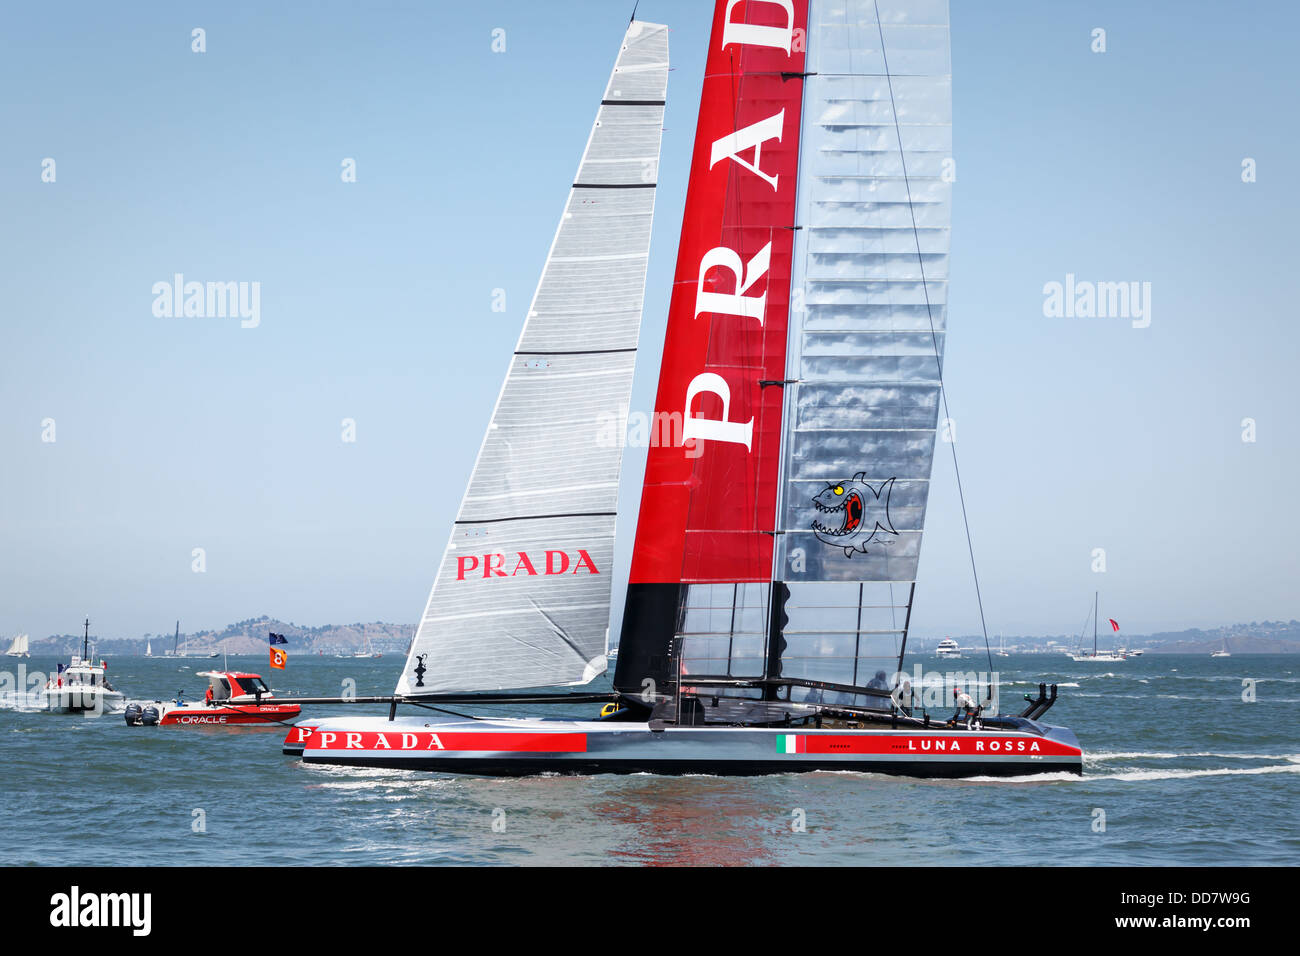 Team Luna Rossa races by in AC 72 Sailboat in Louis Vuitton Cup race on San Francisco Bay, August 21, 2013 Stock Photo